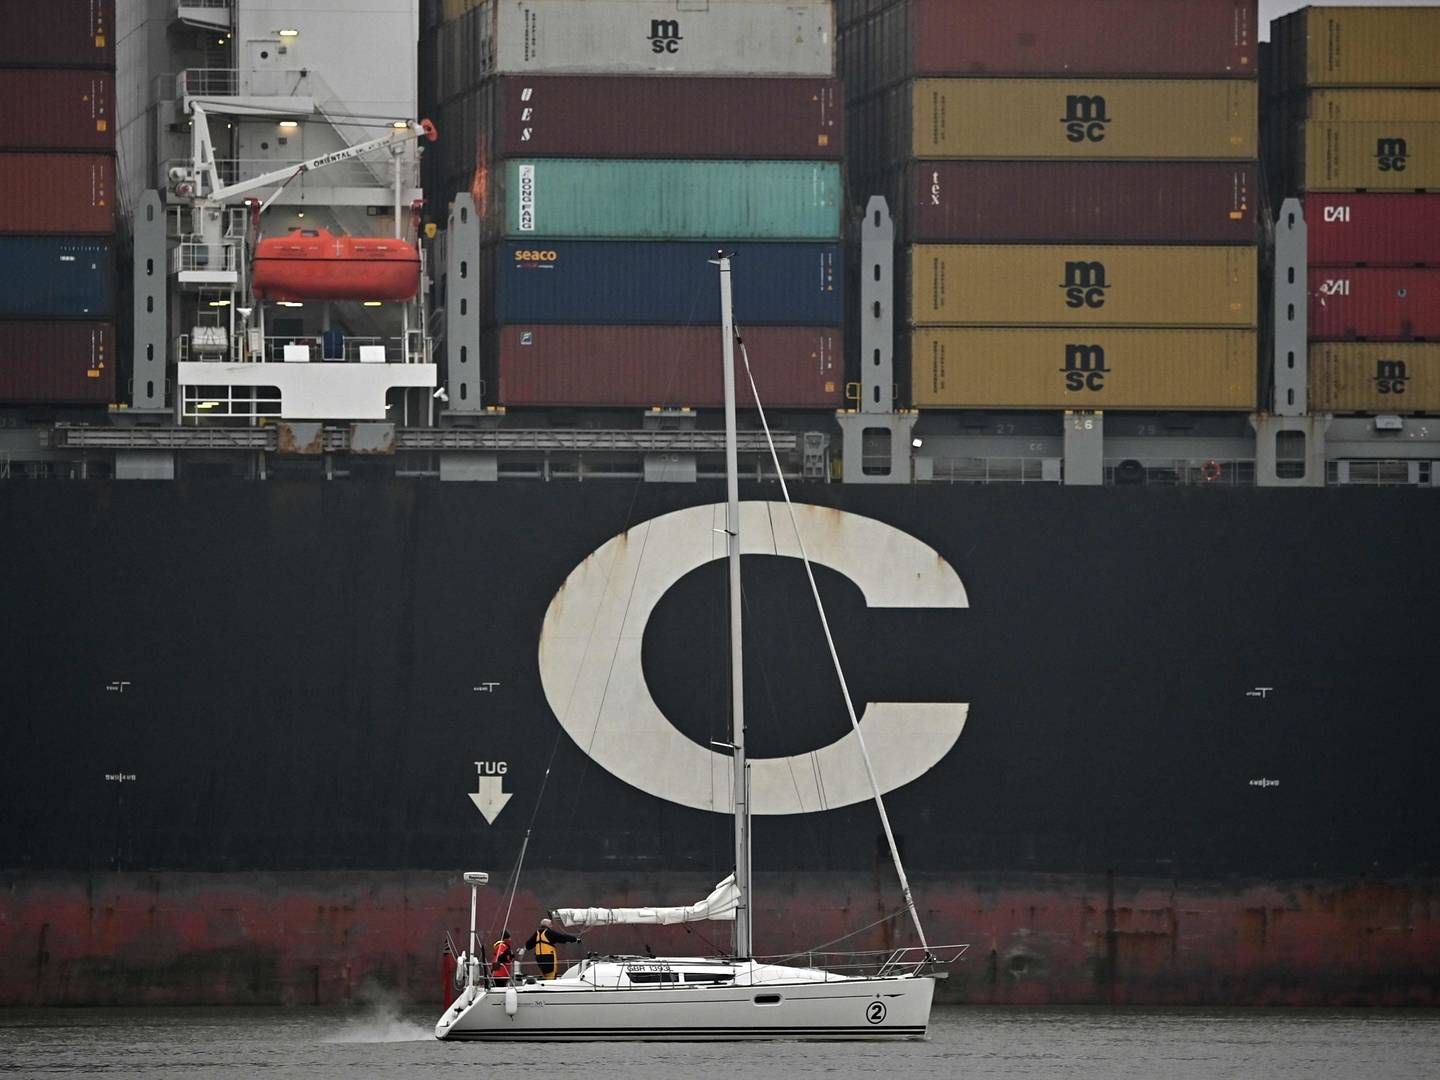 Archive photo. The picture depicts an MSC container liner and not the dry bulk vessel stranded off China. | Photo: Ben Stansall/AFP / AFP